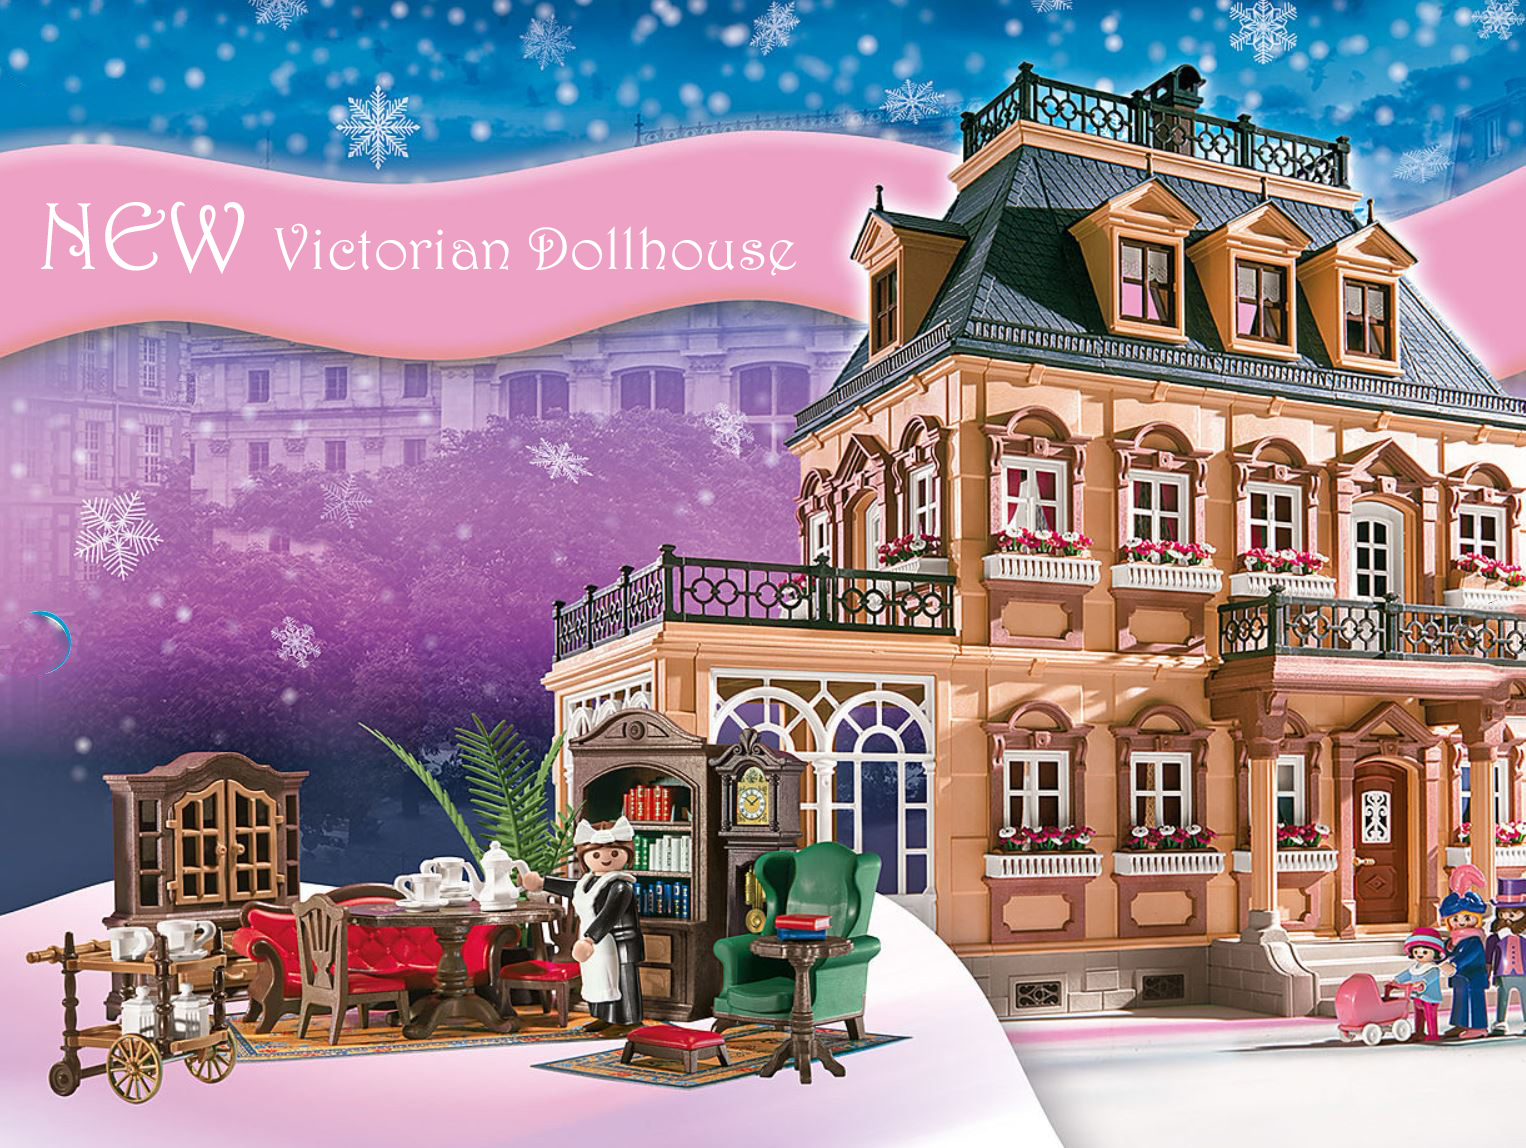 Playmobil UK on X: Welcome to the large Victorian Dollhouse from PLAYMOBIL.   👈 An enchanting toy house with lots of details  that invites imaginative children to retell exciting stories. The #PLAYMOBIL